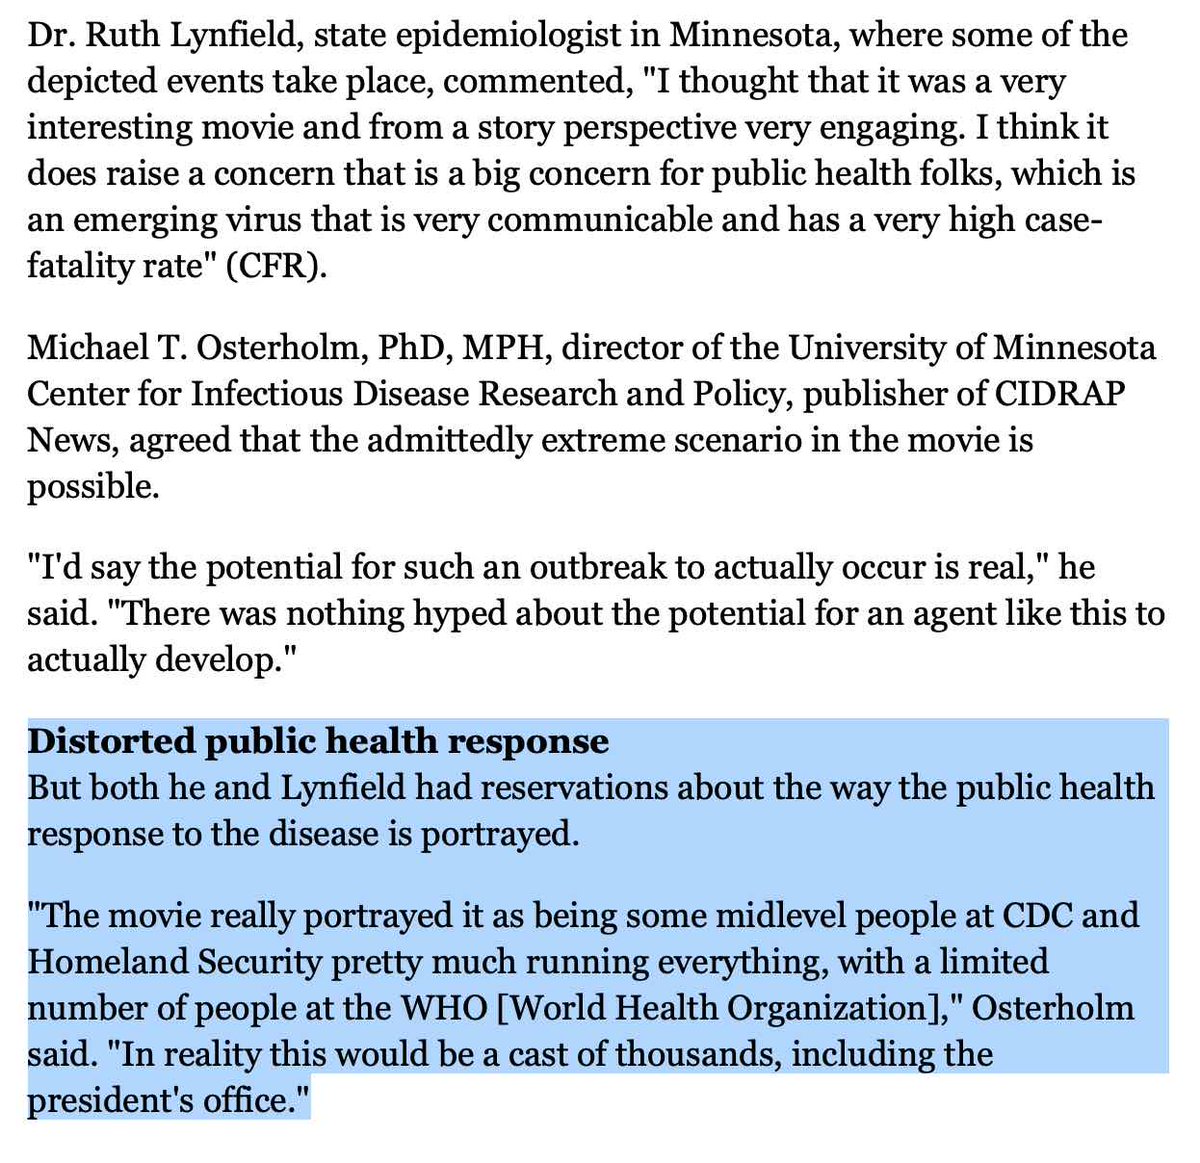 Lynfield & Osterholm also gave the movie “Contagion” high marks for accuracy - but they were certain if any such global pandemic were to occur, the WHO and “a cast of thousands" would be involved in the response - experts. Not just a few “midlevel” people. 8/